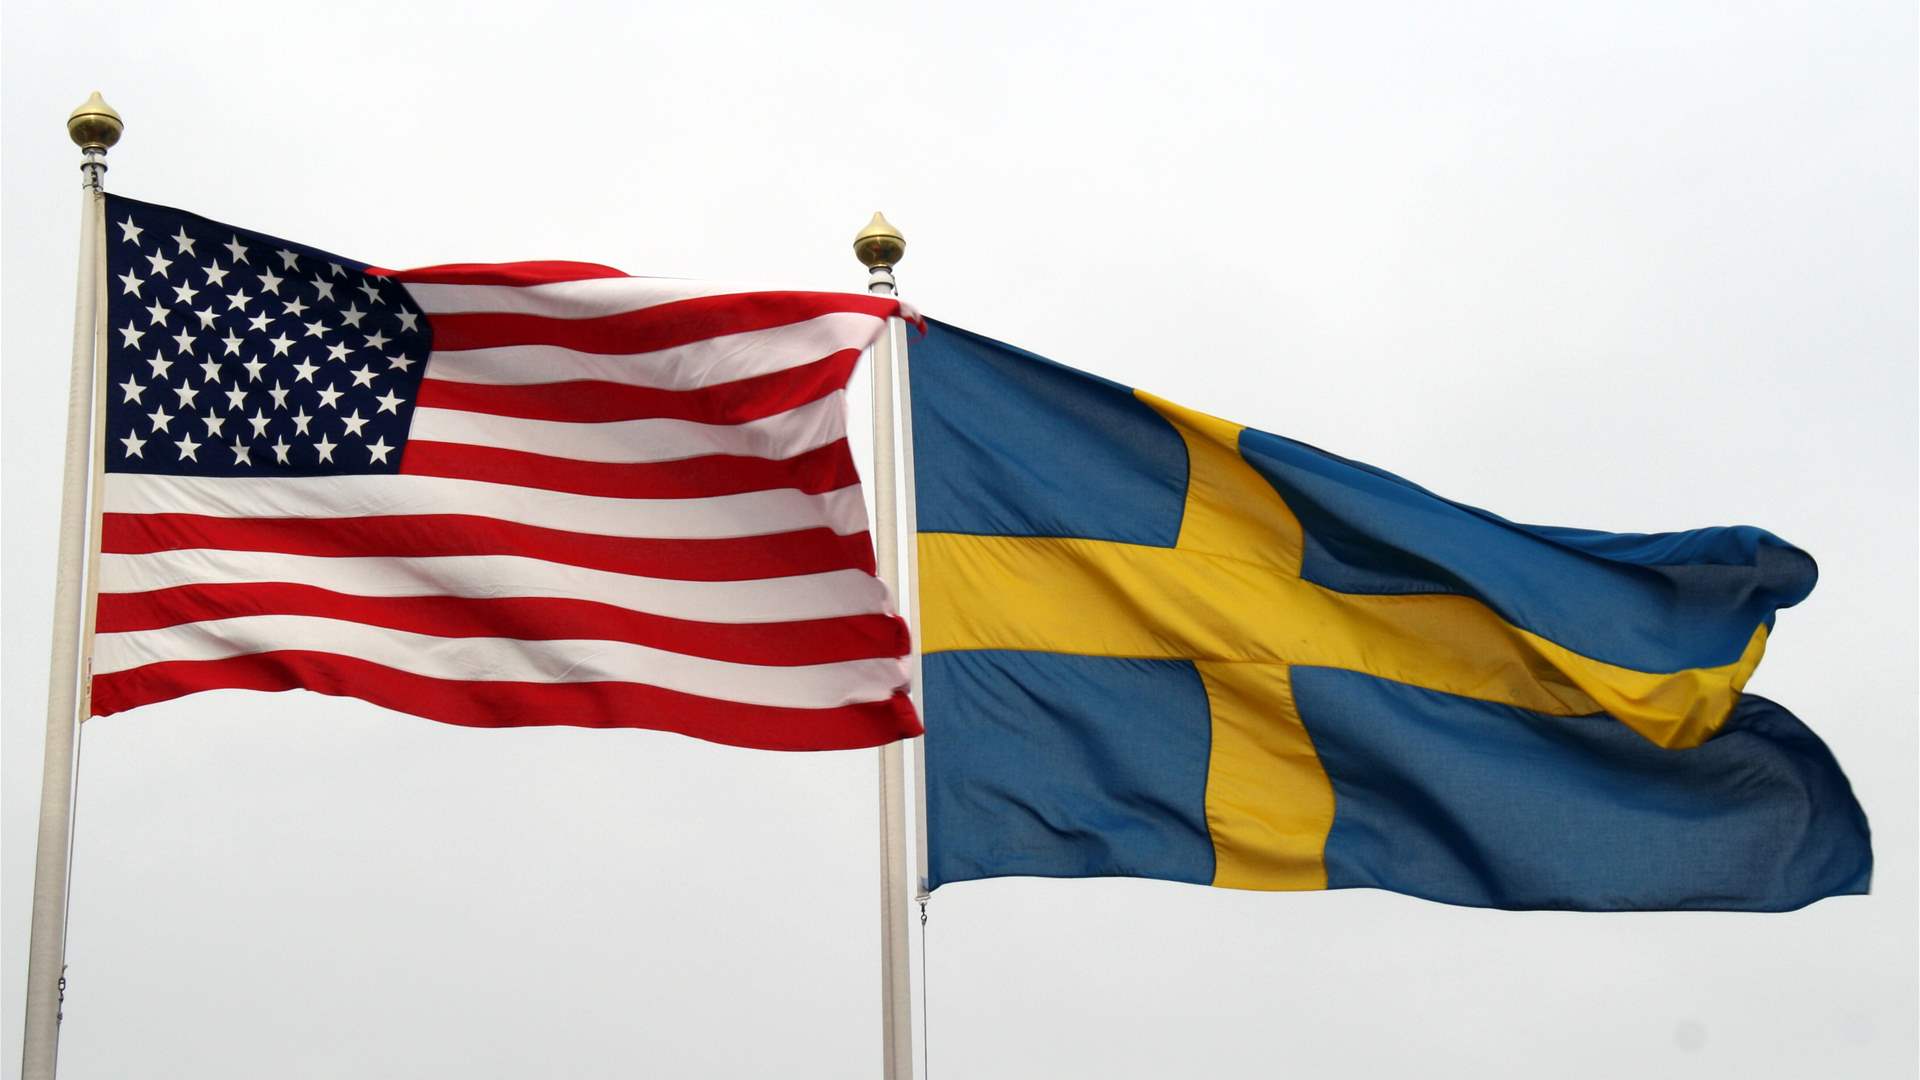 Swedish MPs vote in favor of US defense cooperation deal